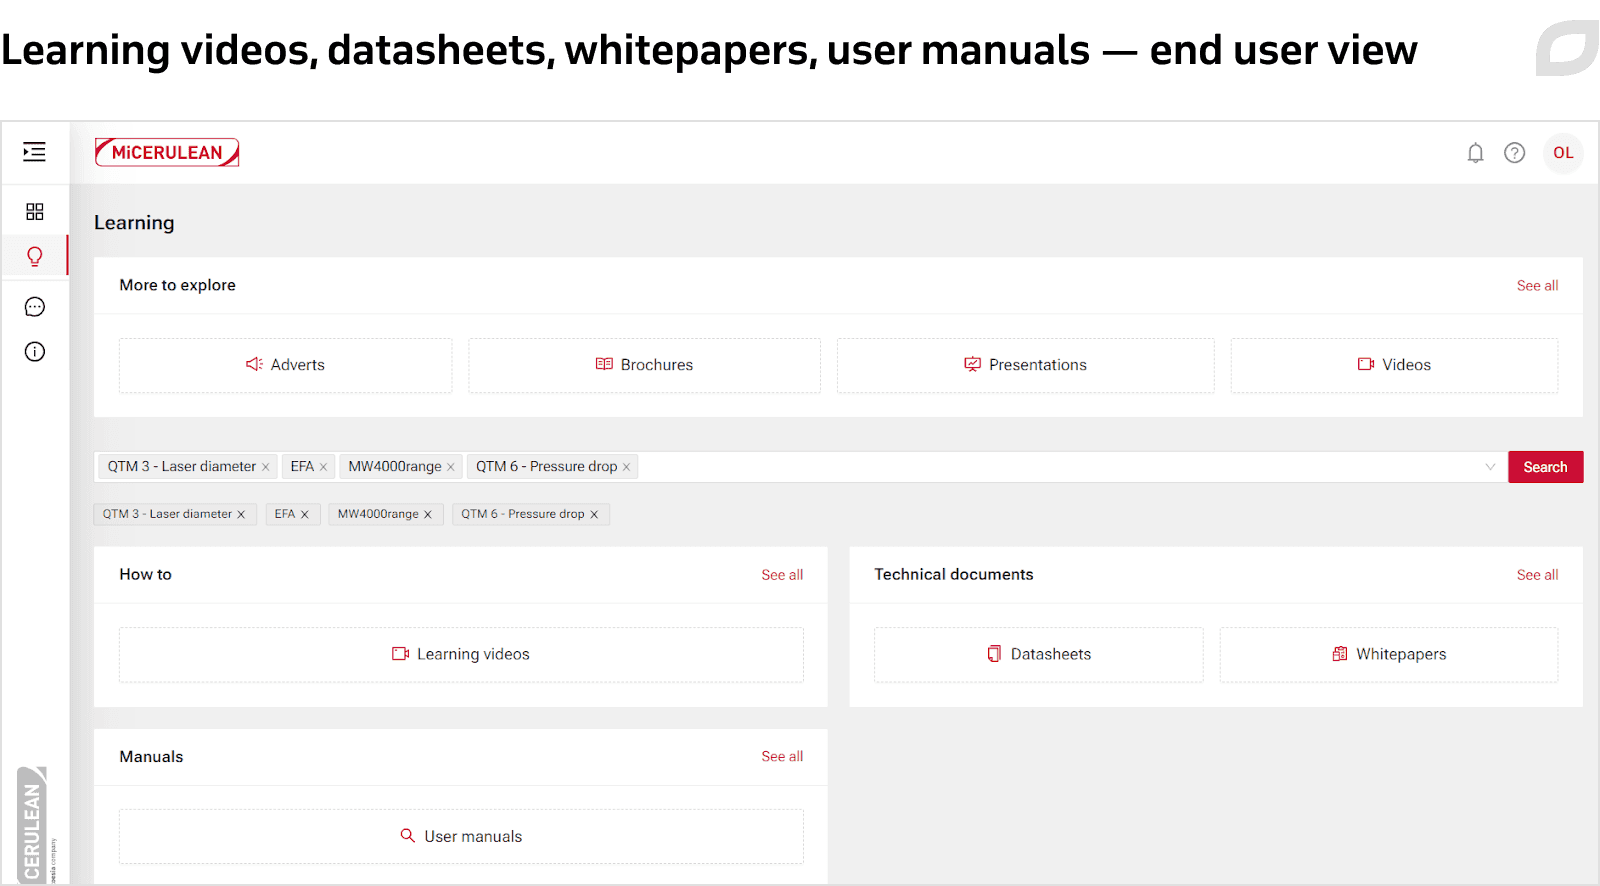 Learning videos, datasheets, whitepapers, user manuals - end user view